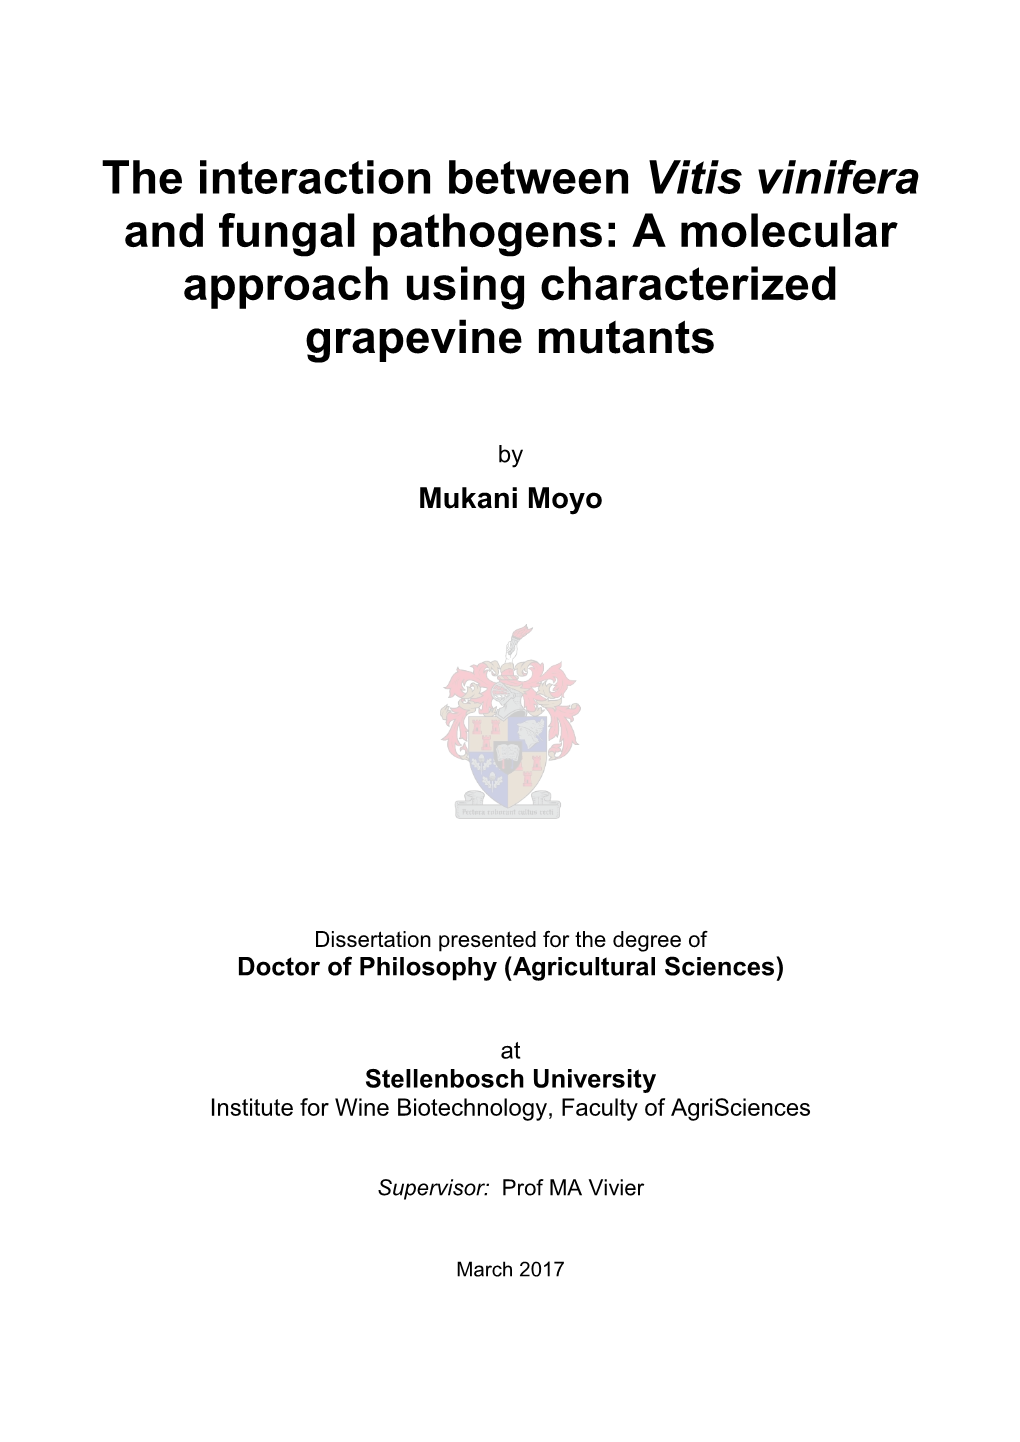 The Interaction Between Vitis Vinifera and Fungal Pathogens: a Molecular Approach Using Characterized Grapevine Mutants